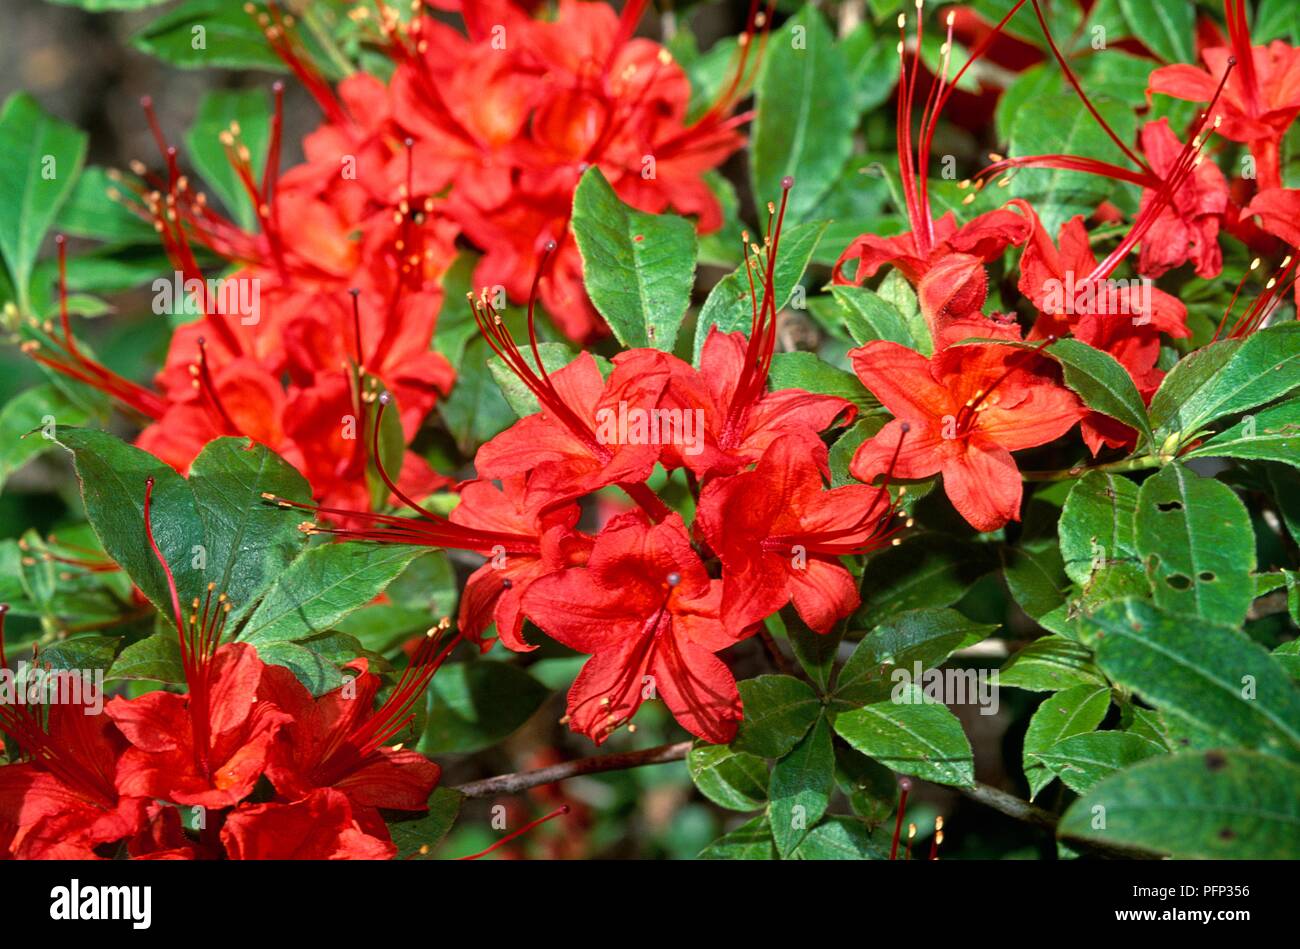 Rhododendron prunifolium 'Hillier', red flowers, close-up Stock Photo